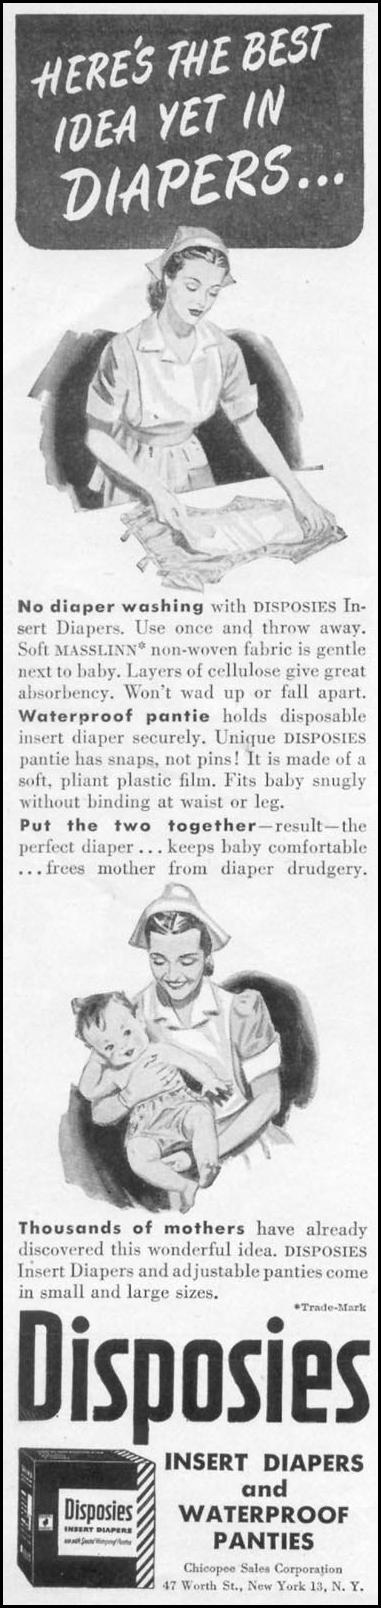 DISPOSIES INSERT DIAPERS
WOMAN'S DAY
05/01/1947
p. 12